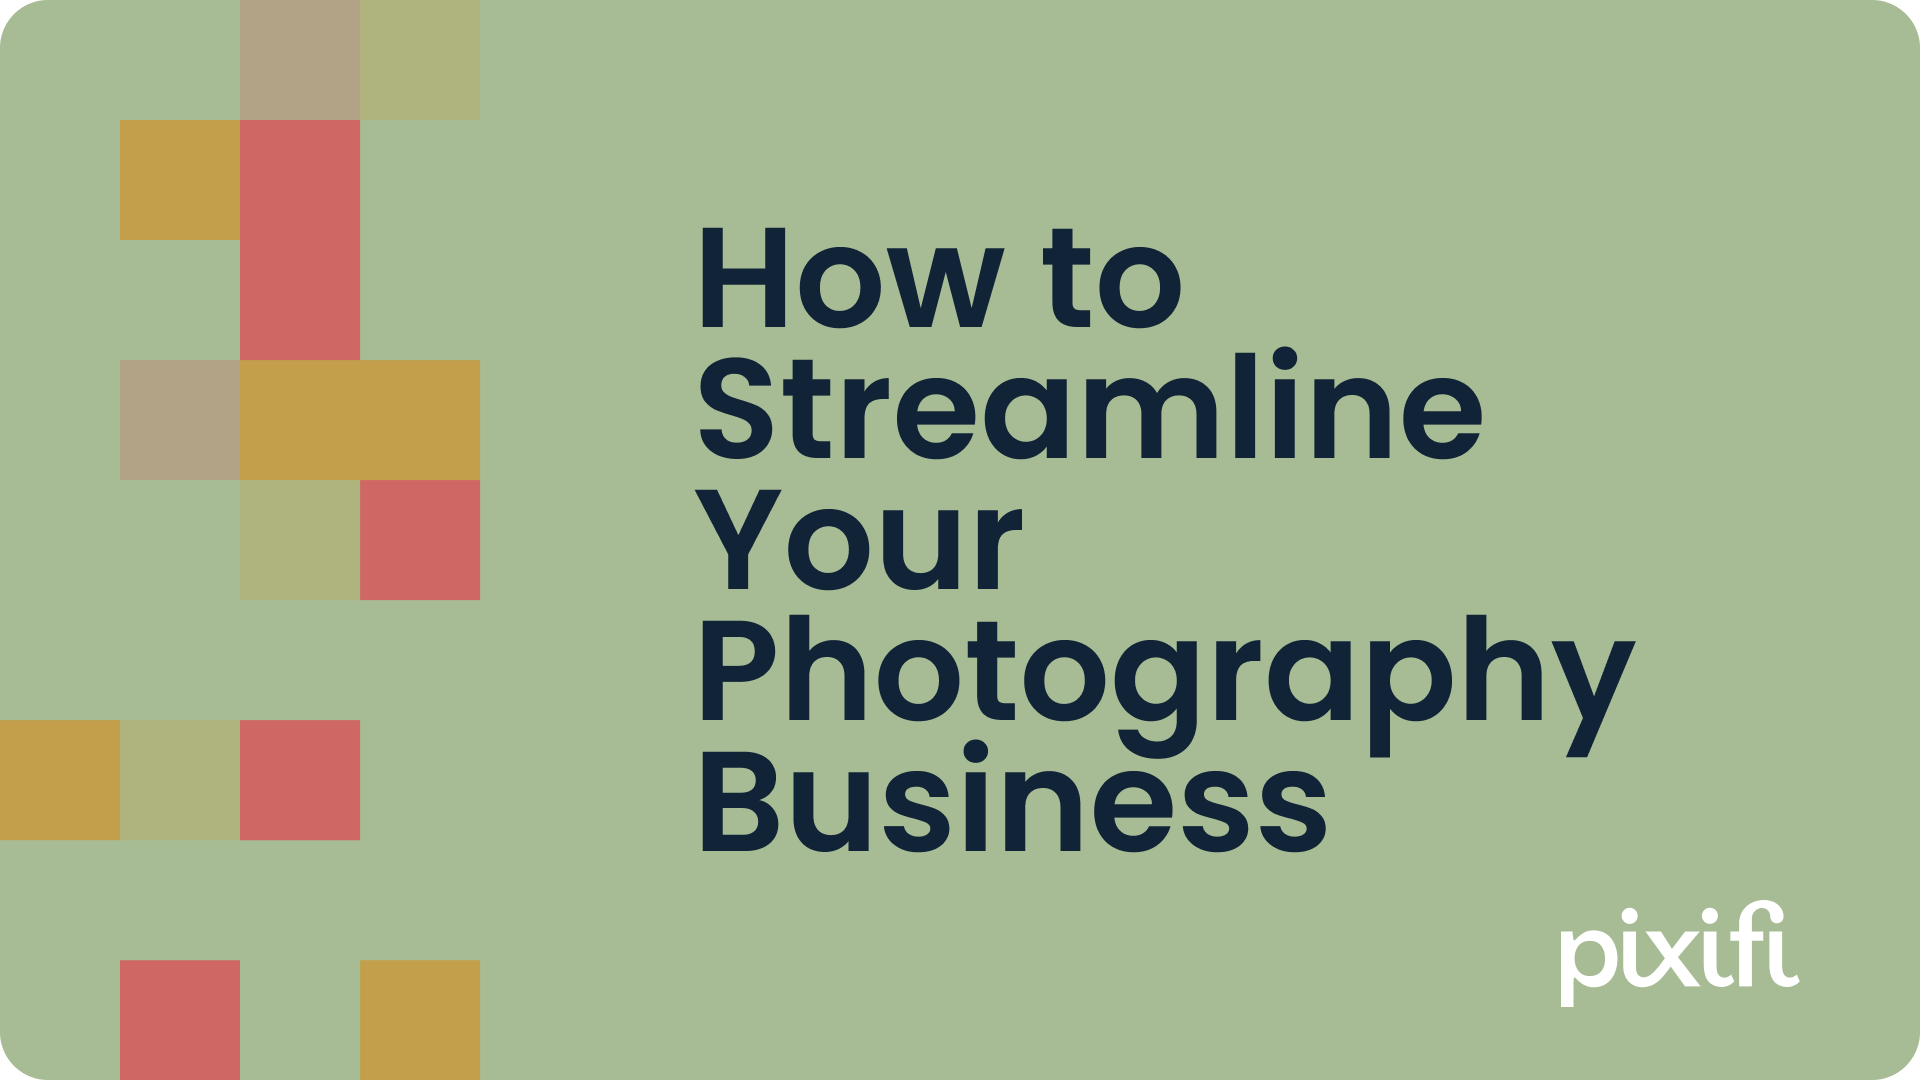 How to Streamline Your Photography Business